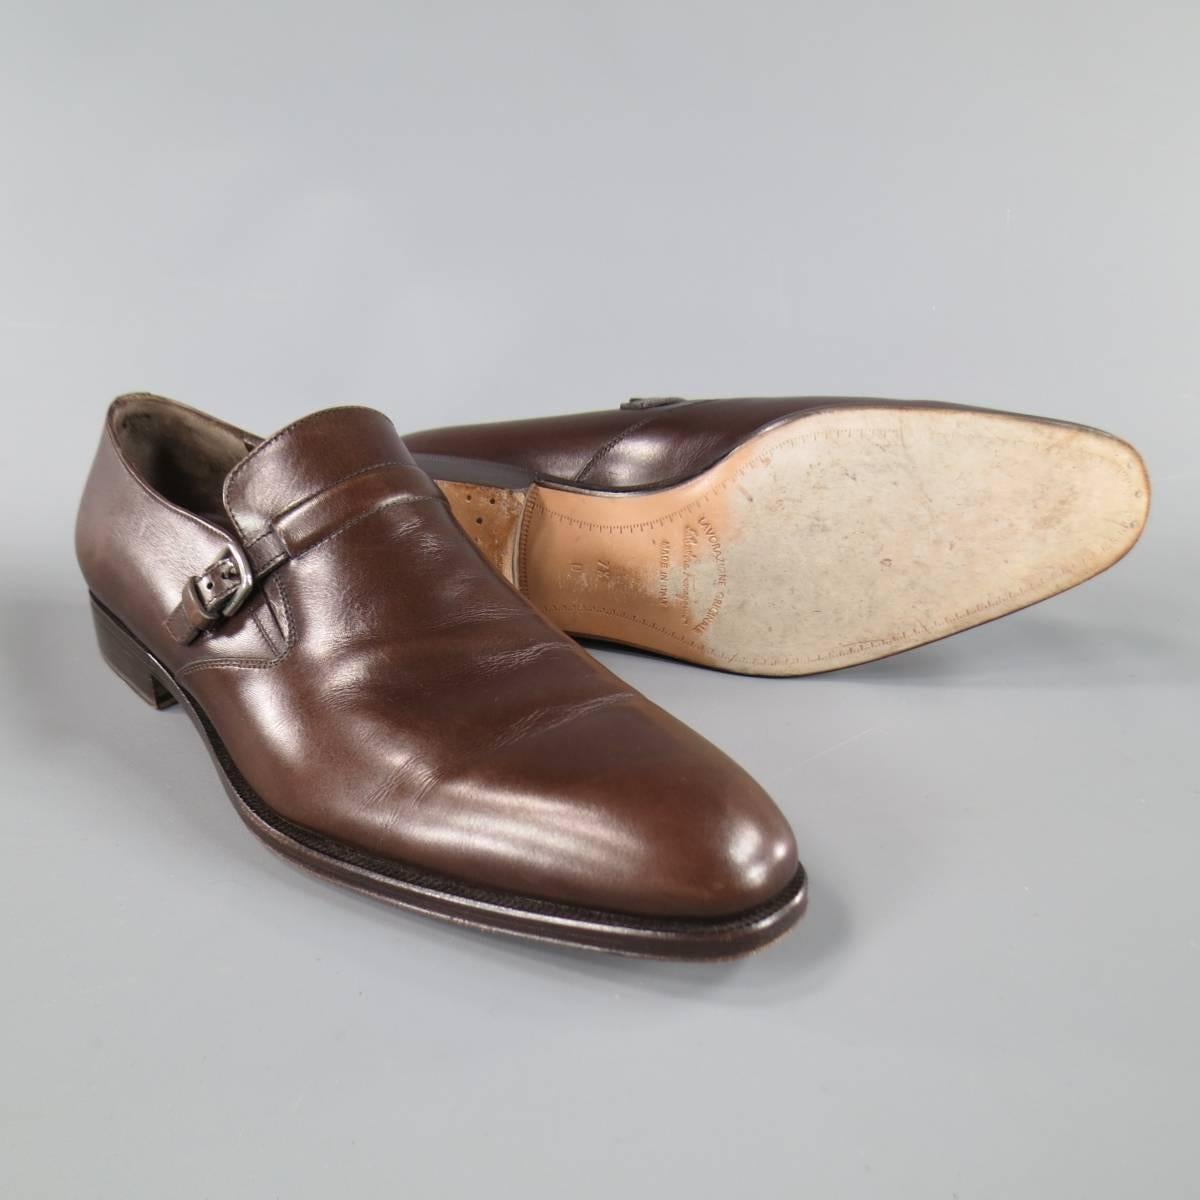 SALVATORE FERRAGAMO Loafers consists of leather material in a brown color tone. Designed in a round toe front, single monk strap with silver buckle. Detailed with tone-on-tone stitching and brown leather sole. Made in Italy.

 
Excellent Pre-Owned